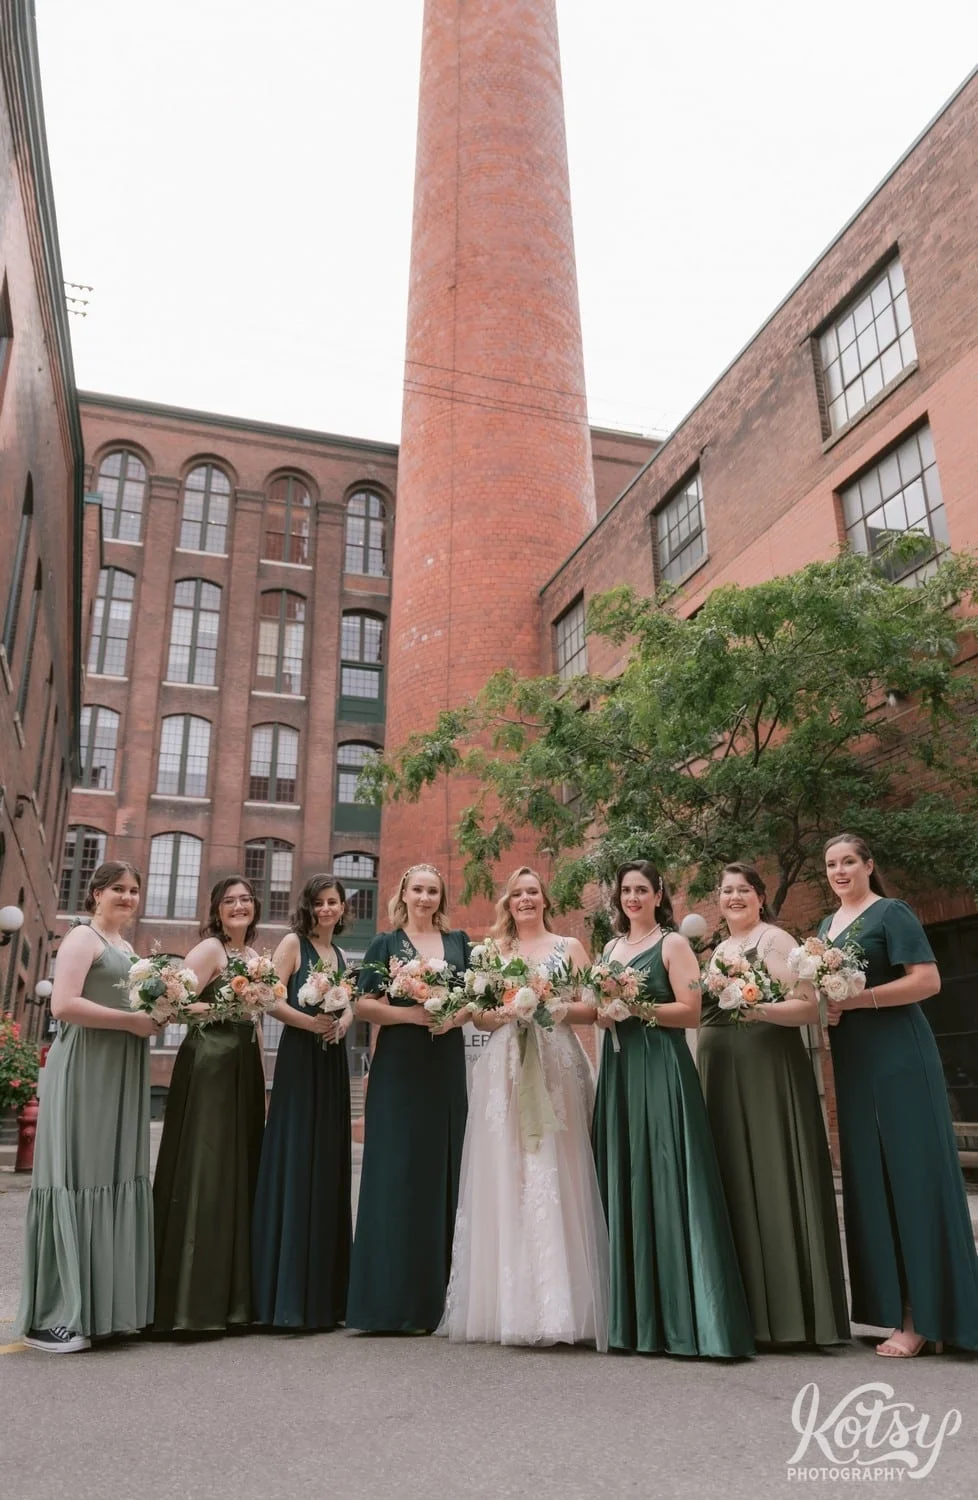 A bride wearing a white bridle gown holding flour bouquet poses for a group photo in front of a tall smoke stack with her bridesmaids wearing green dresses